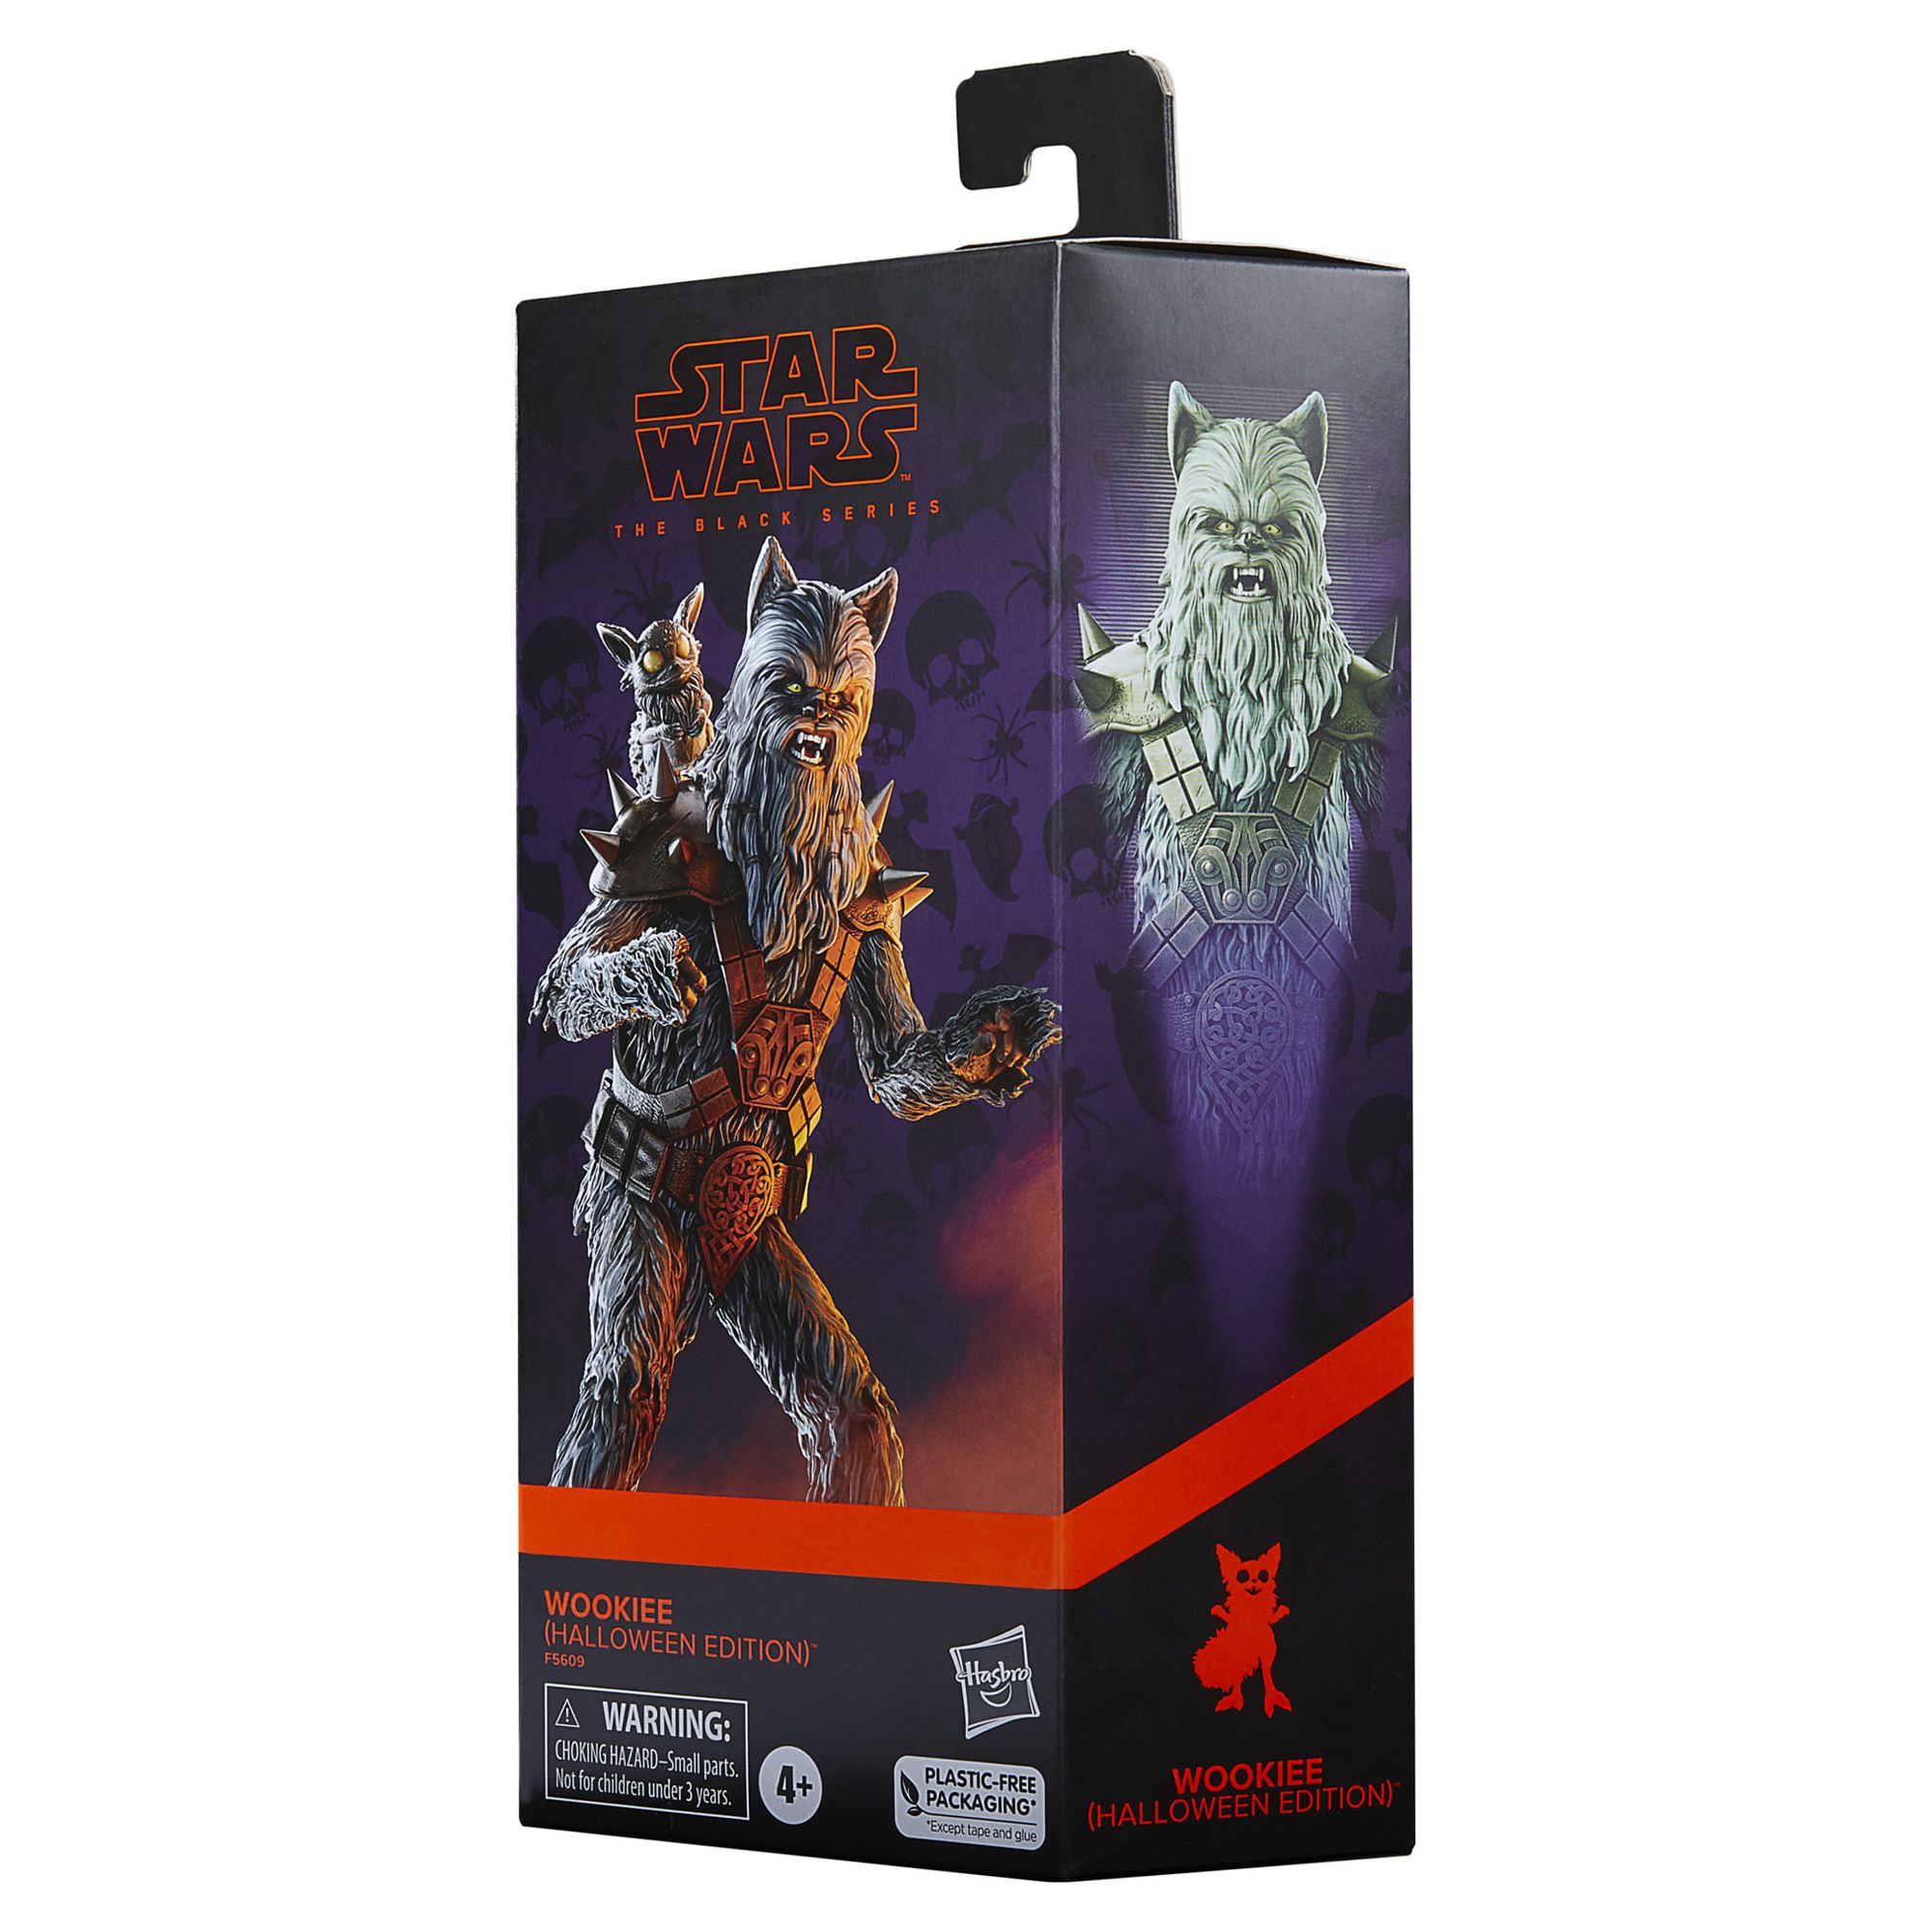 Star Wars: The Black Series Wookiee Halloween Bucket Edition Kids Toy Action Figure for Boys and Girls Ages 4 5 6 7 8 and Up (6”) - image 5 of 7